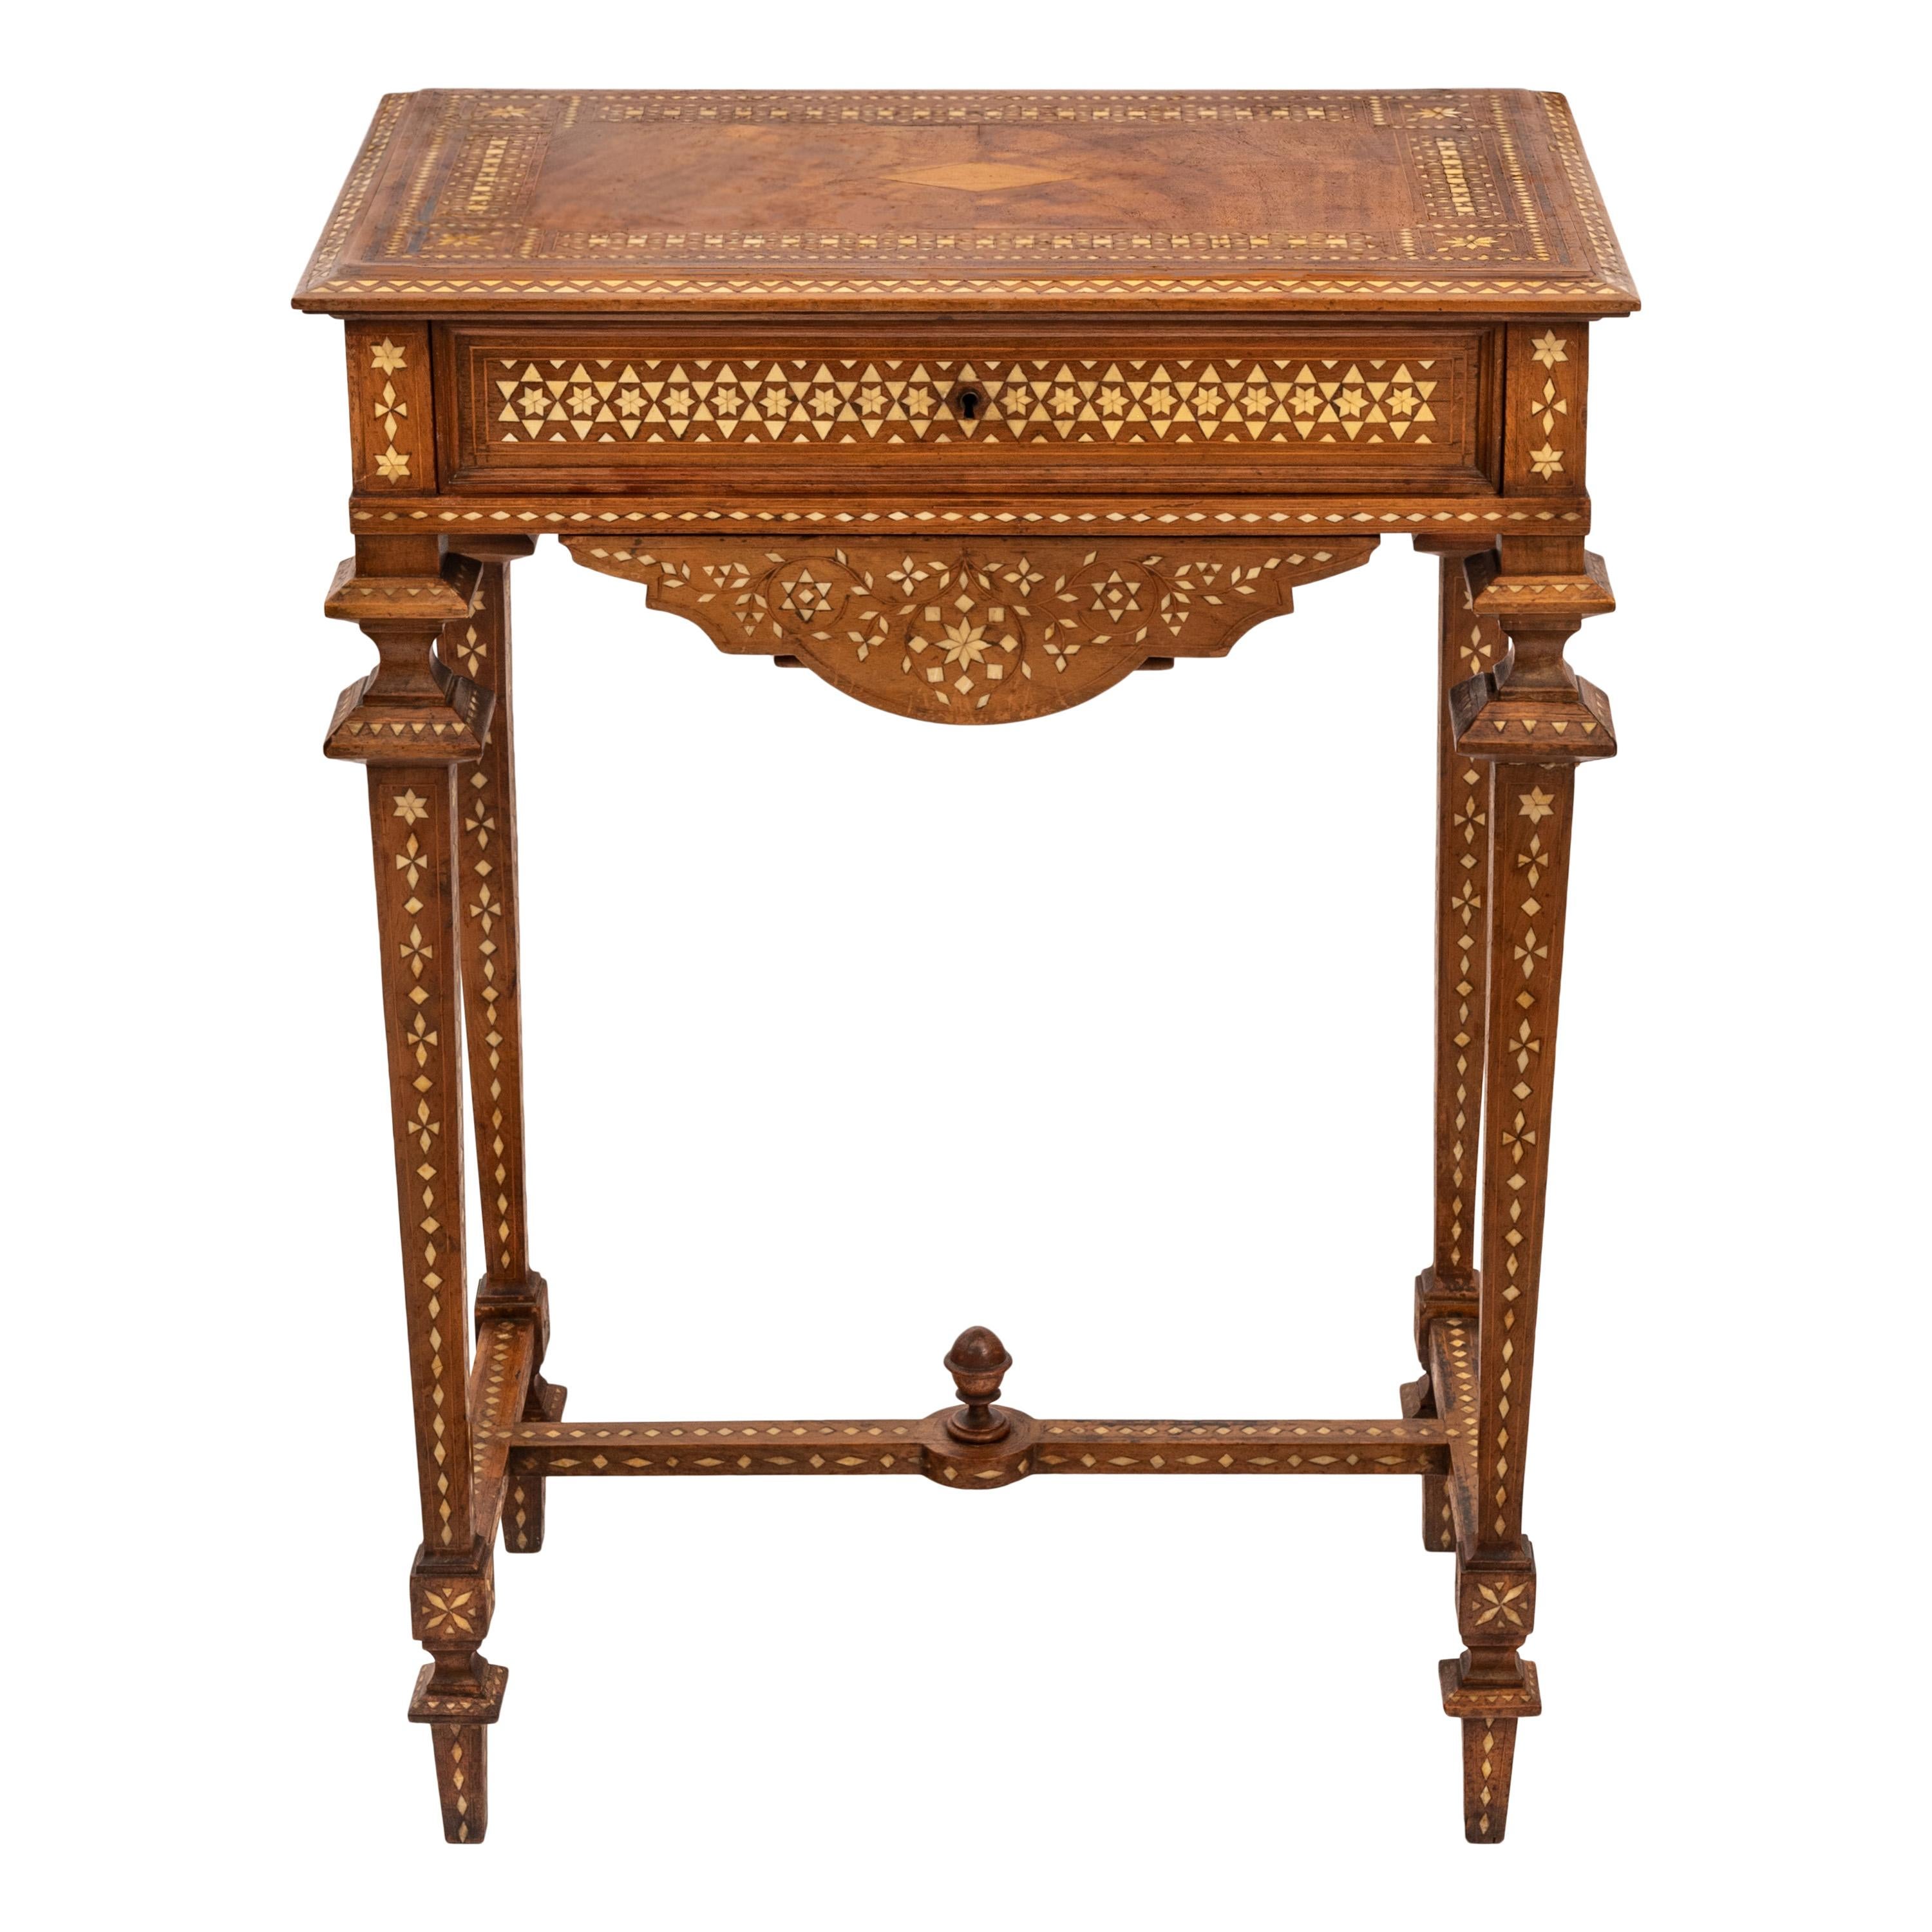 Anglo-Indian Antique Anglo Indian Teak Mahogany Inlaid Marquetry Work Side Sewing Table 1870